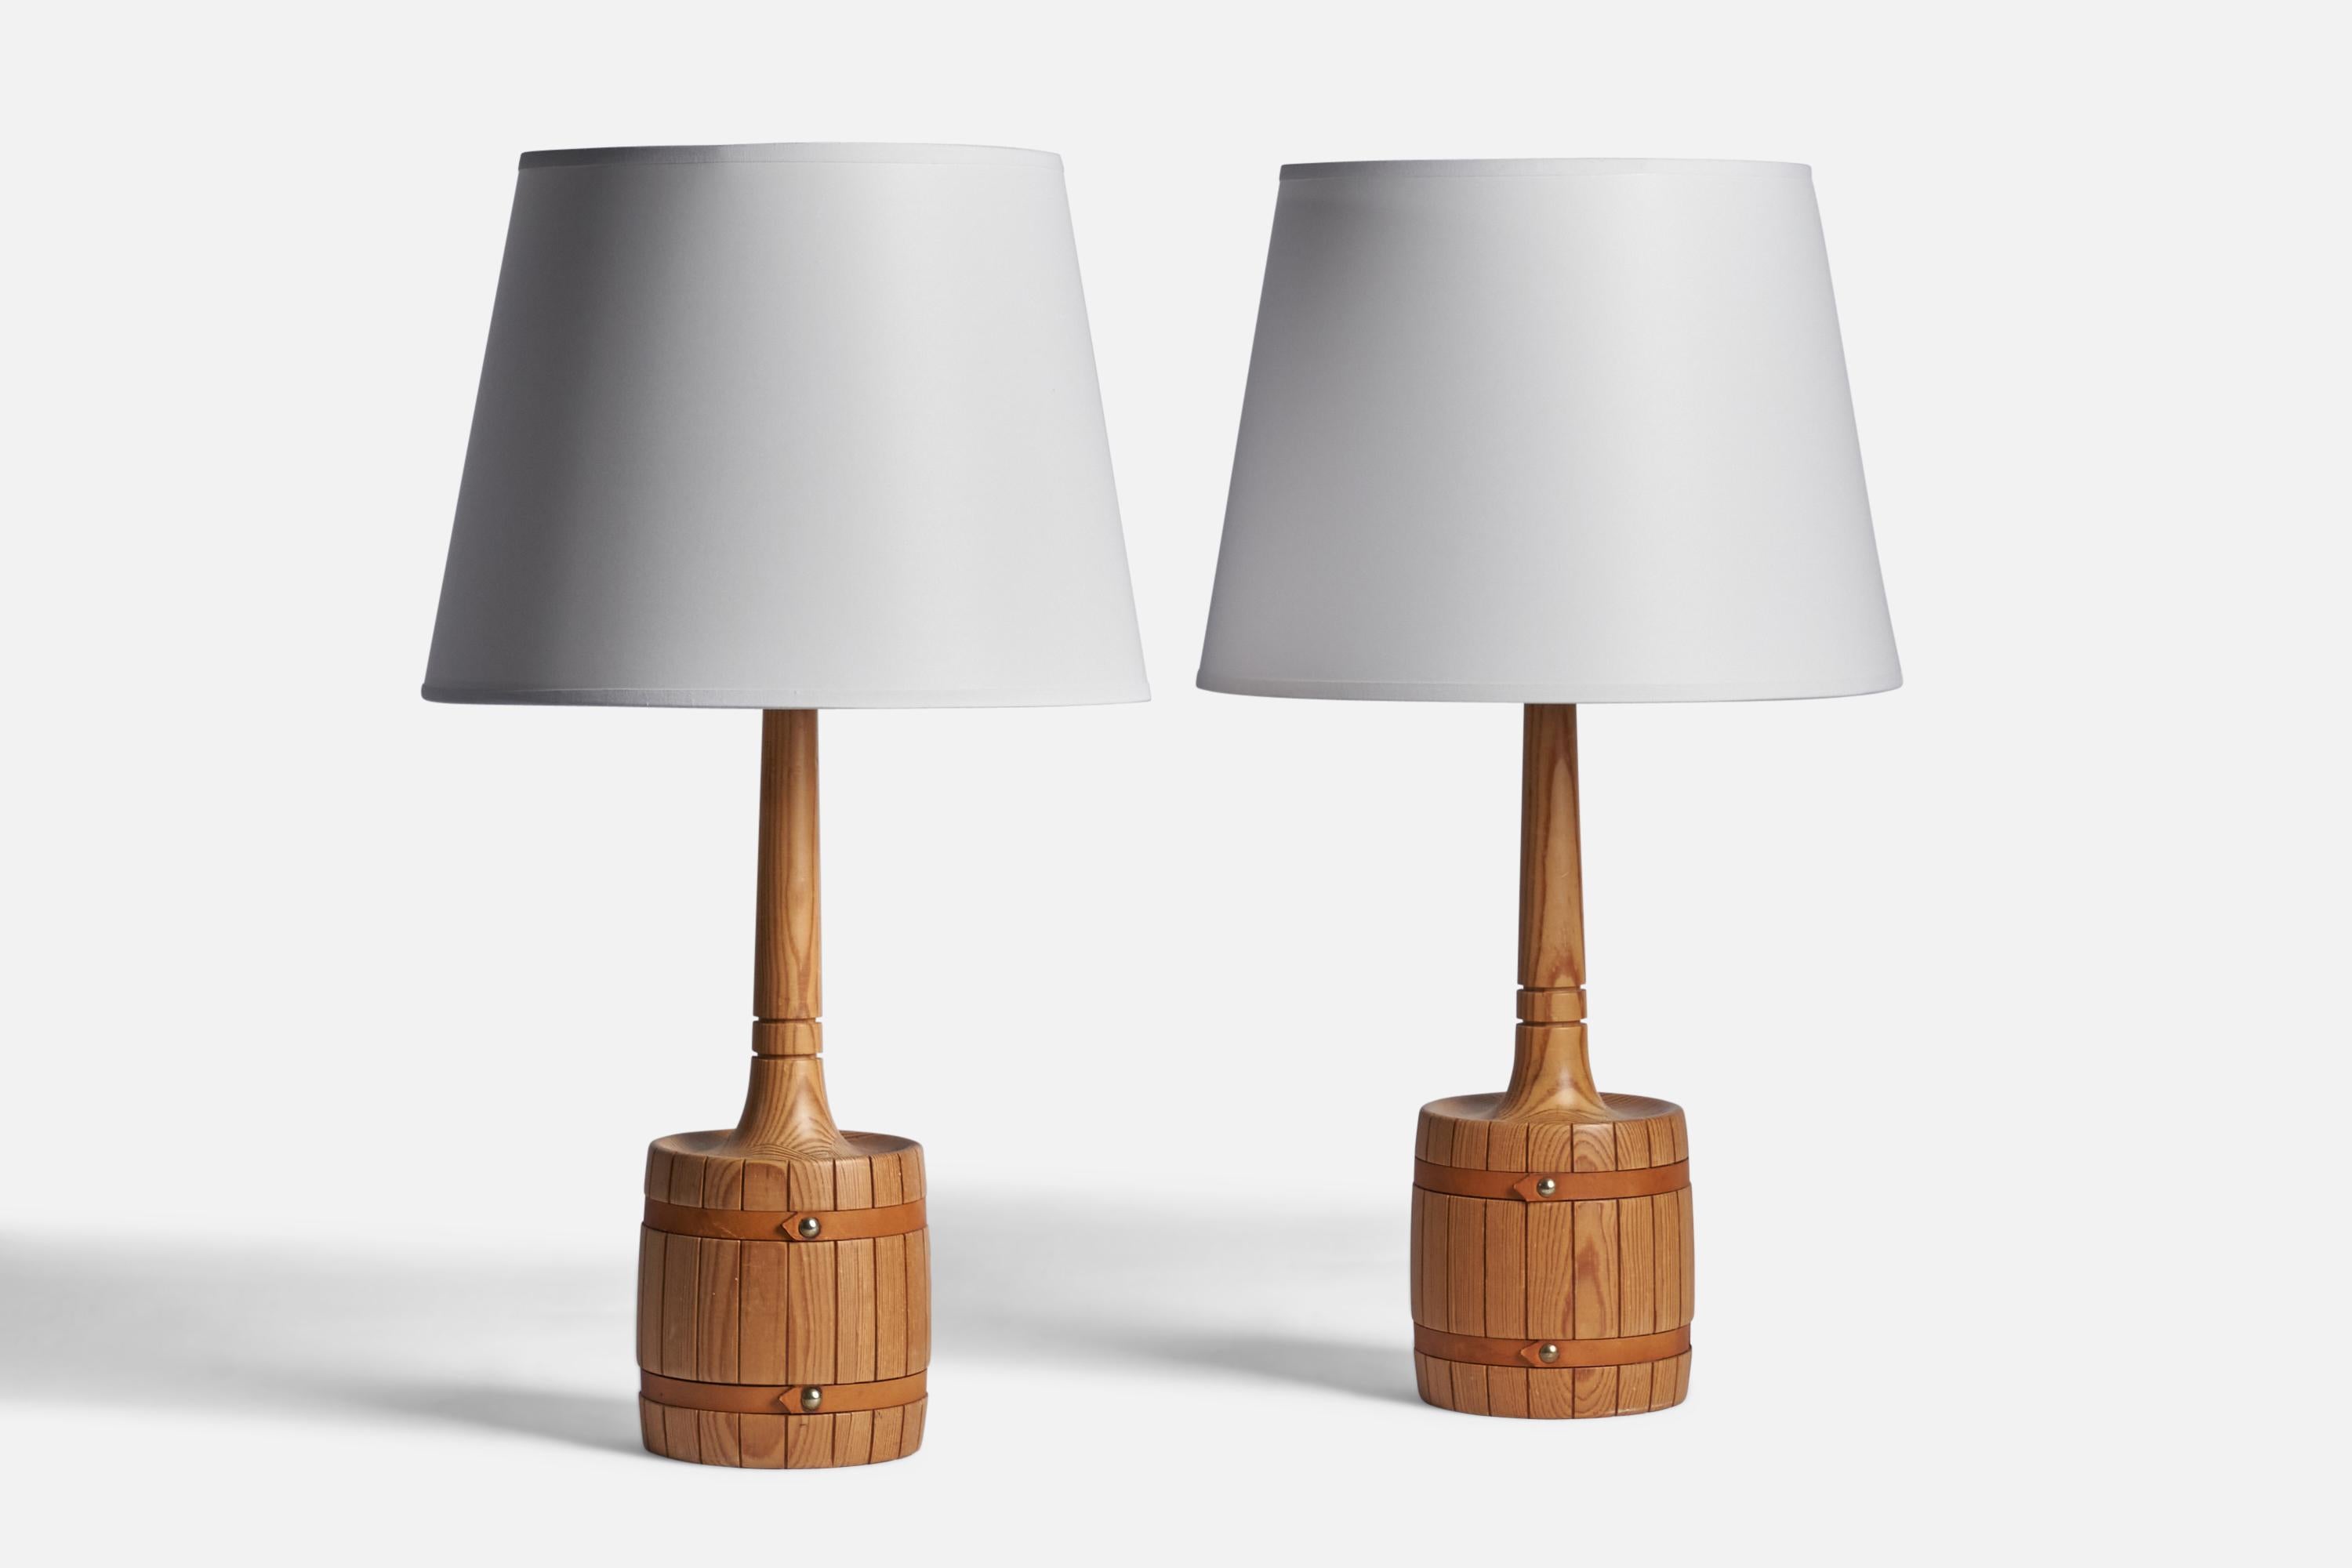 A pair of pine, leather and brass table lamps designed and produced by Tranås Stilarmatur, Sweden, 1970s.

Dimensions of Lamp (inches): 16“ H x 5.25” Diameter
Dimensions of Shade (inches): 9” Top Diameter x 12” Bottom Diameter x 9” H 
Dimensions of